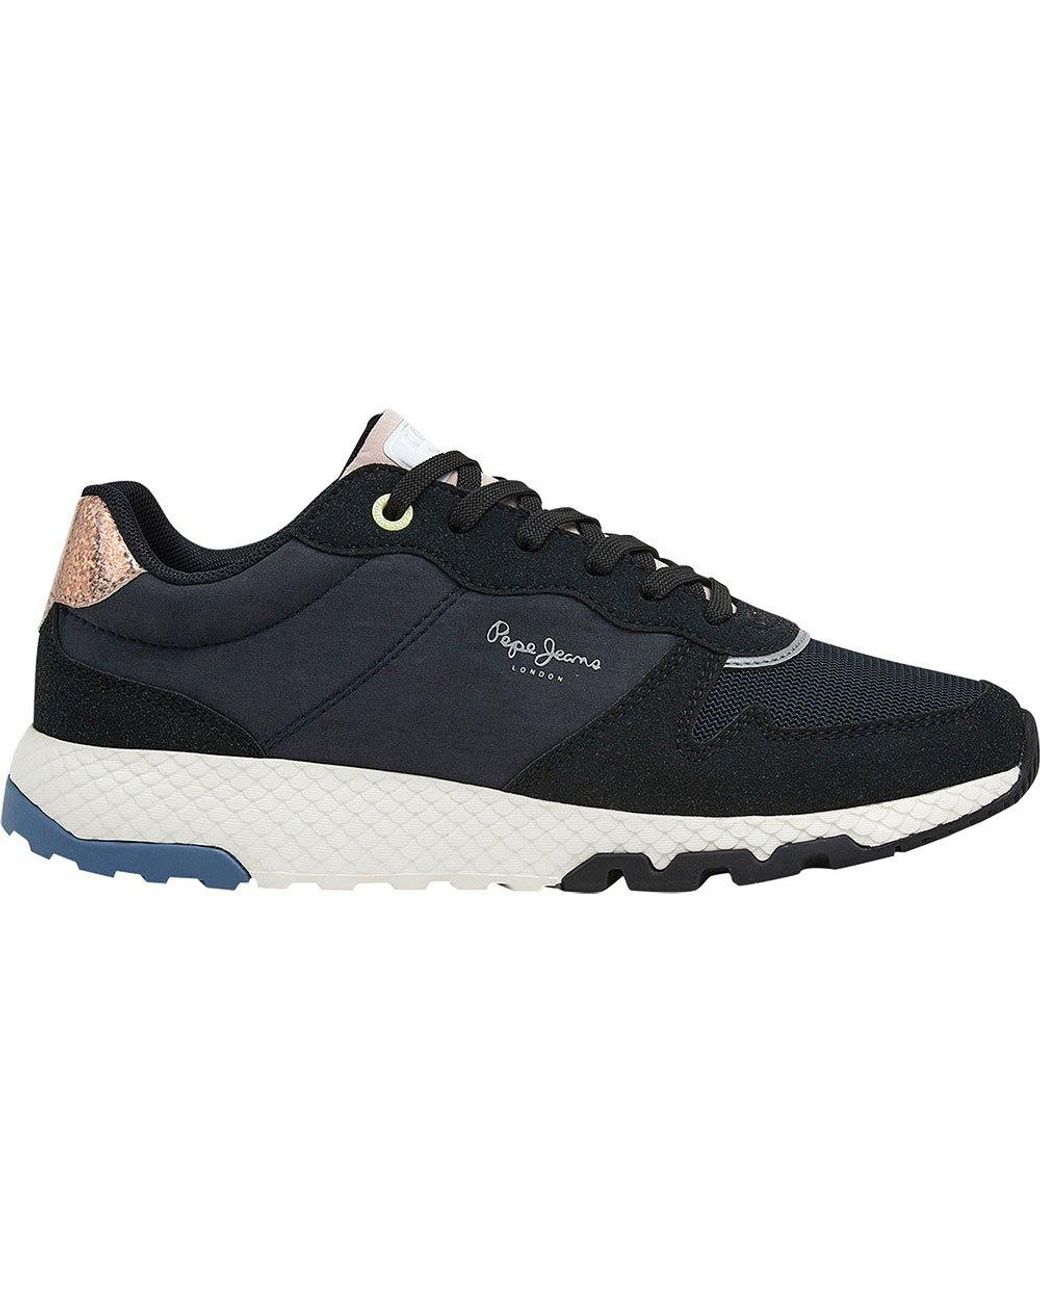 Pepe Jeans Koko Yto Trainers in Blue | Lyst